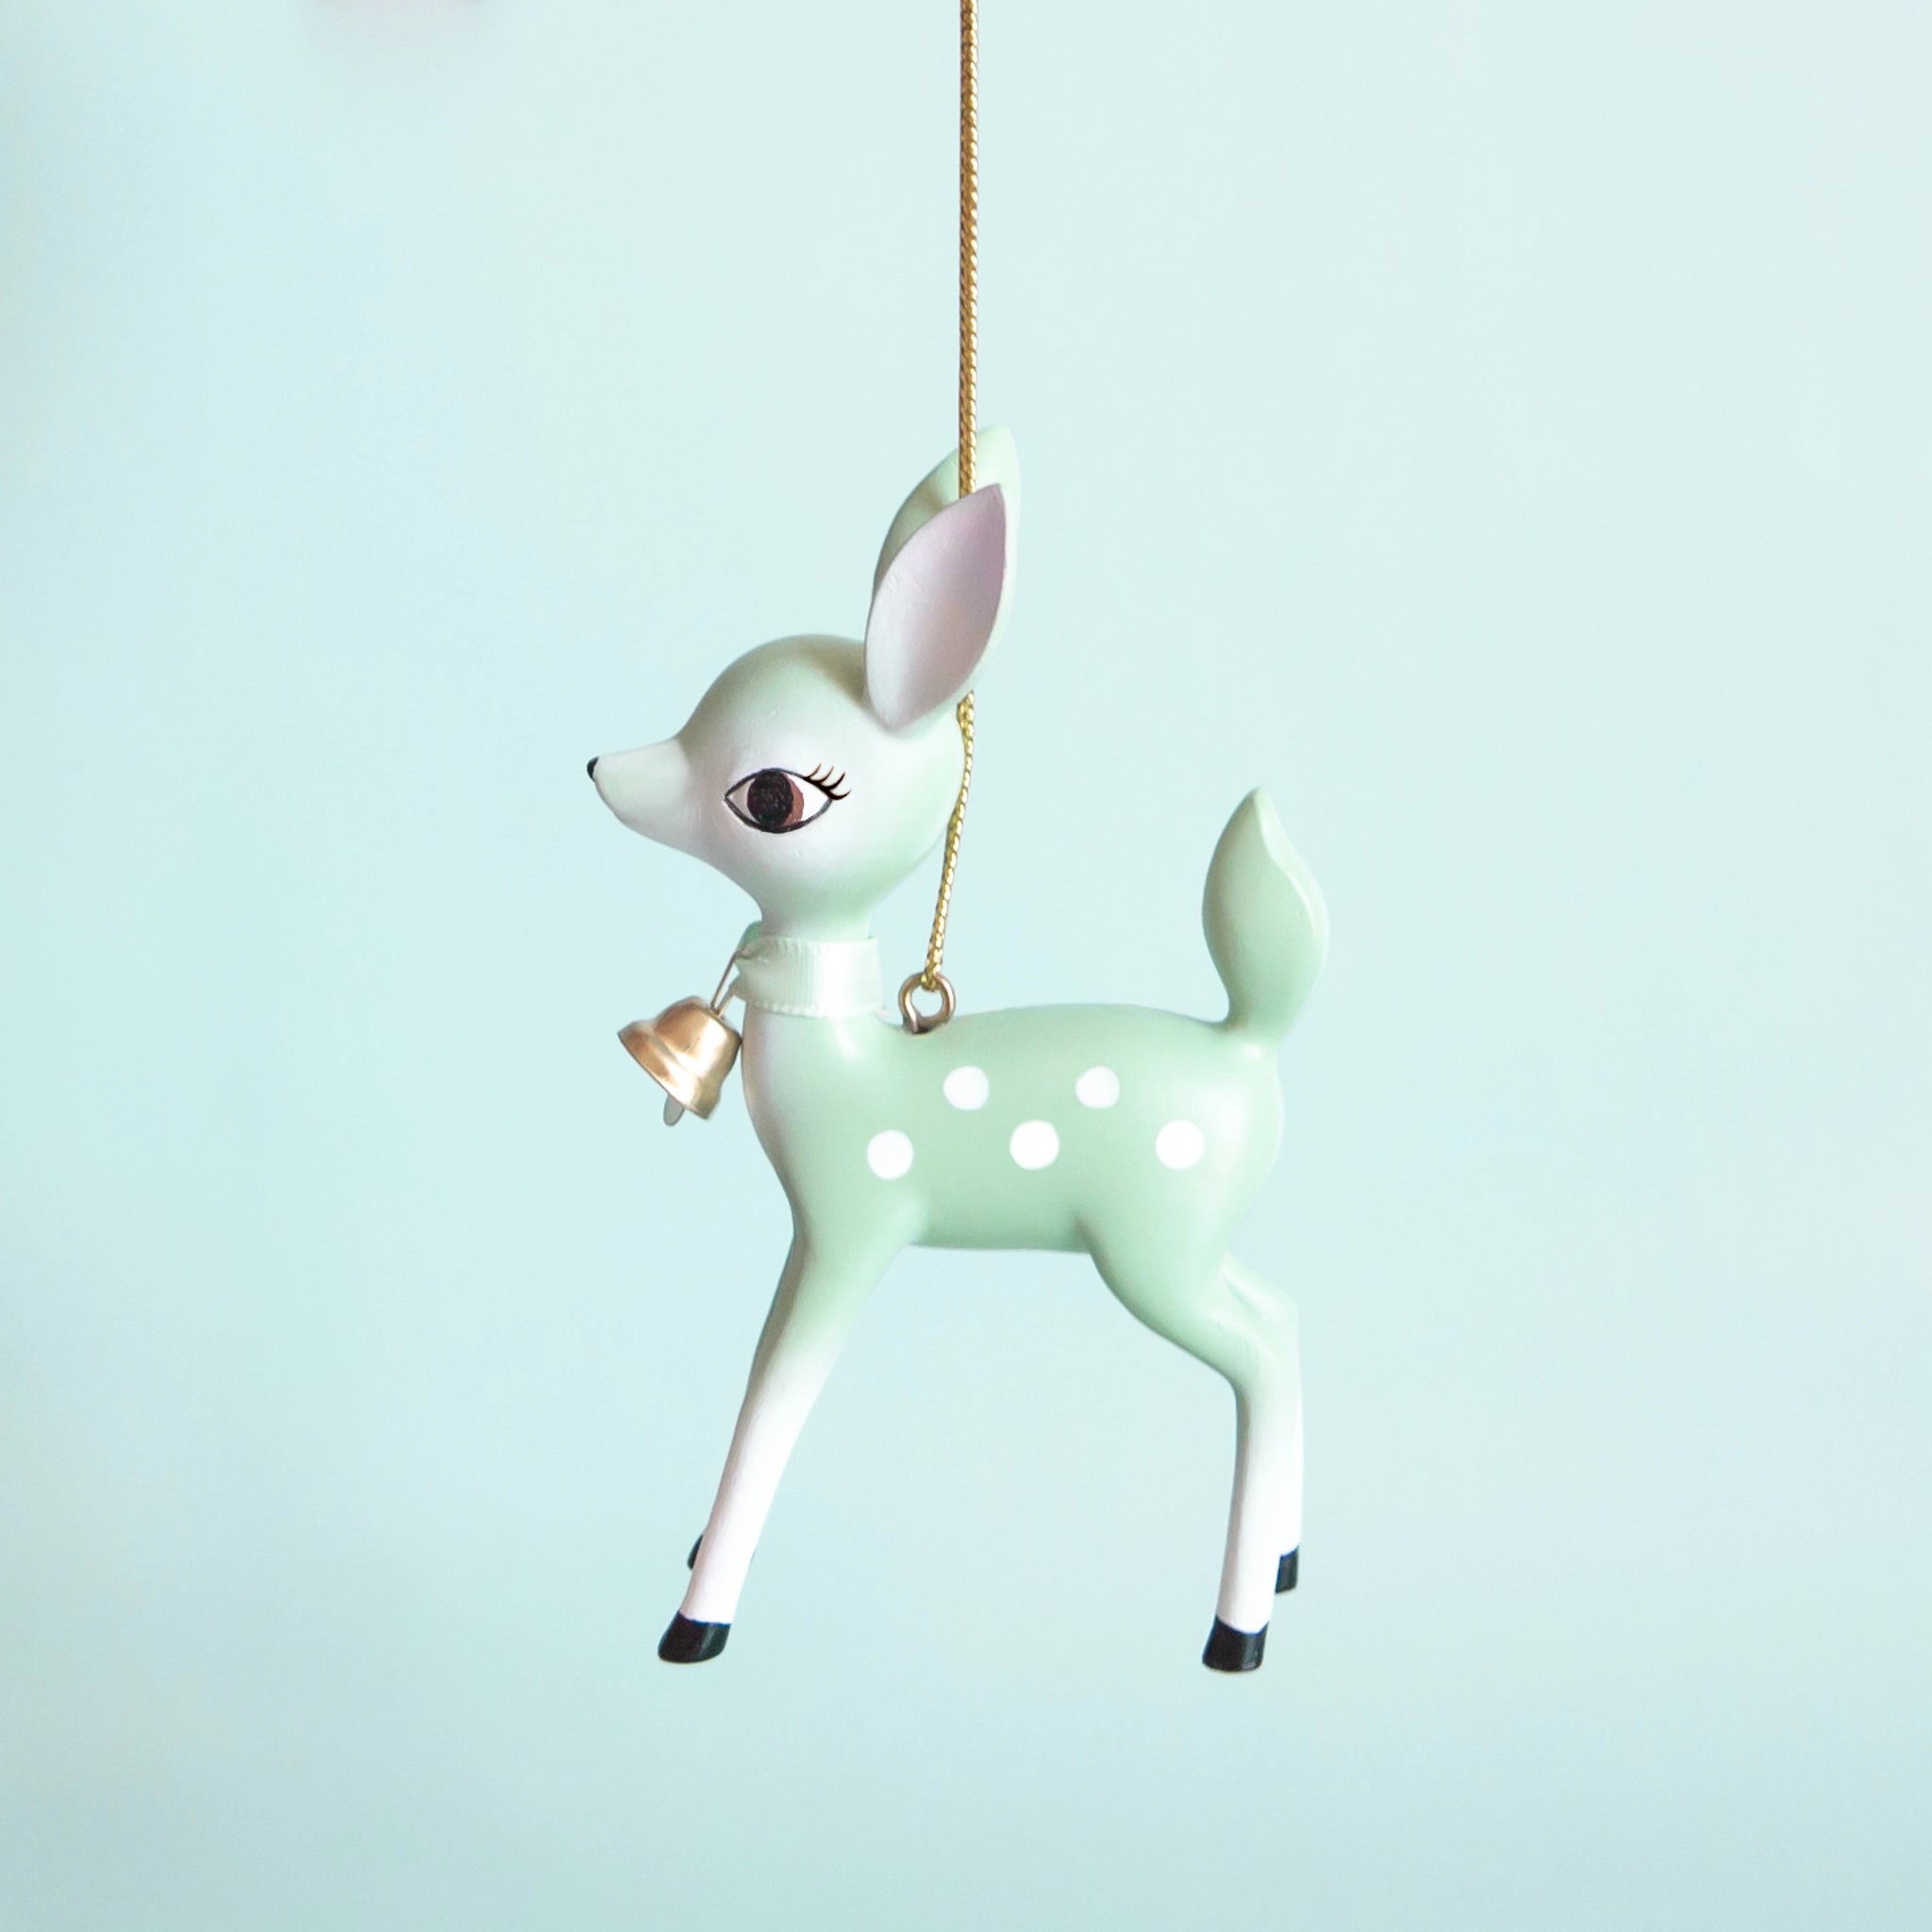 On a light blue background is a mint green retro deer ornament with white details and spots and a gold bell on the front of its neck along with a gold string loop for hanging.